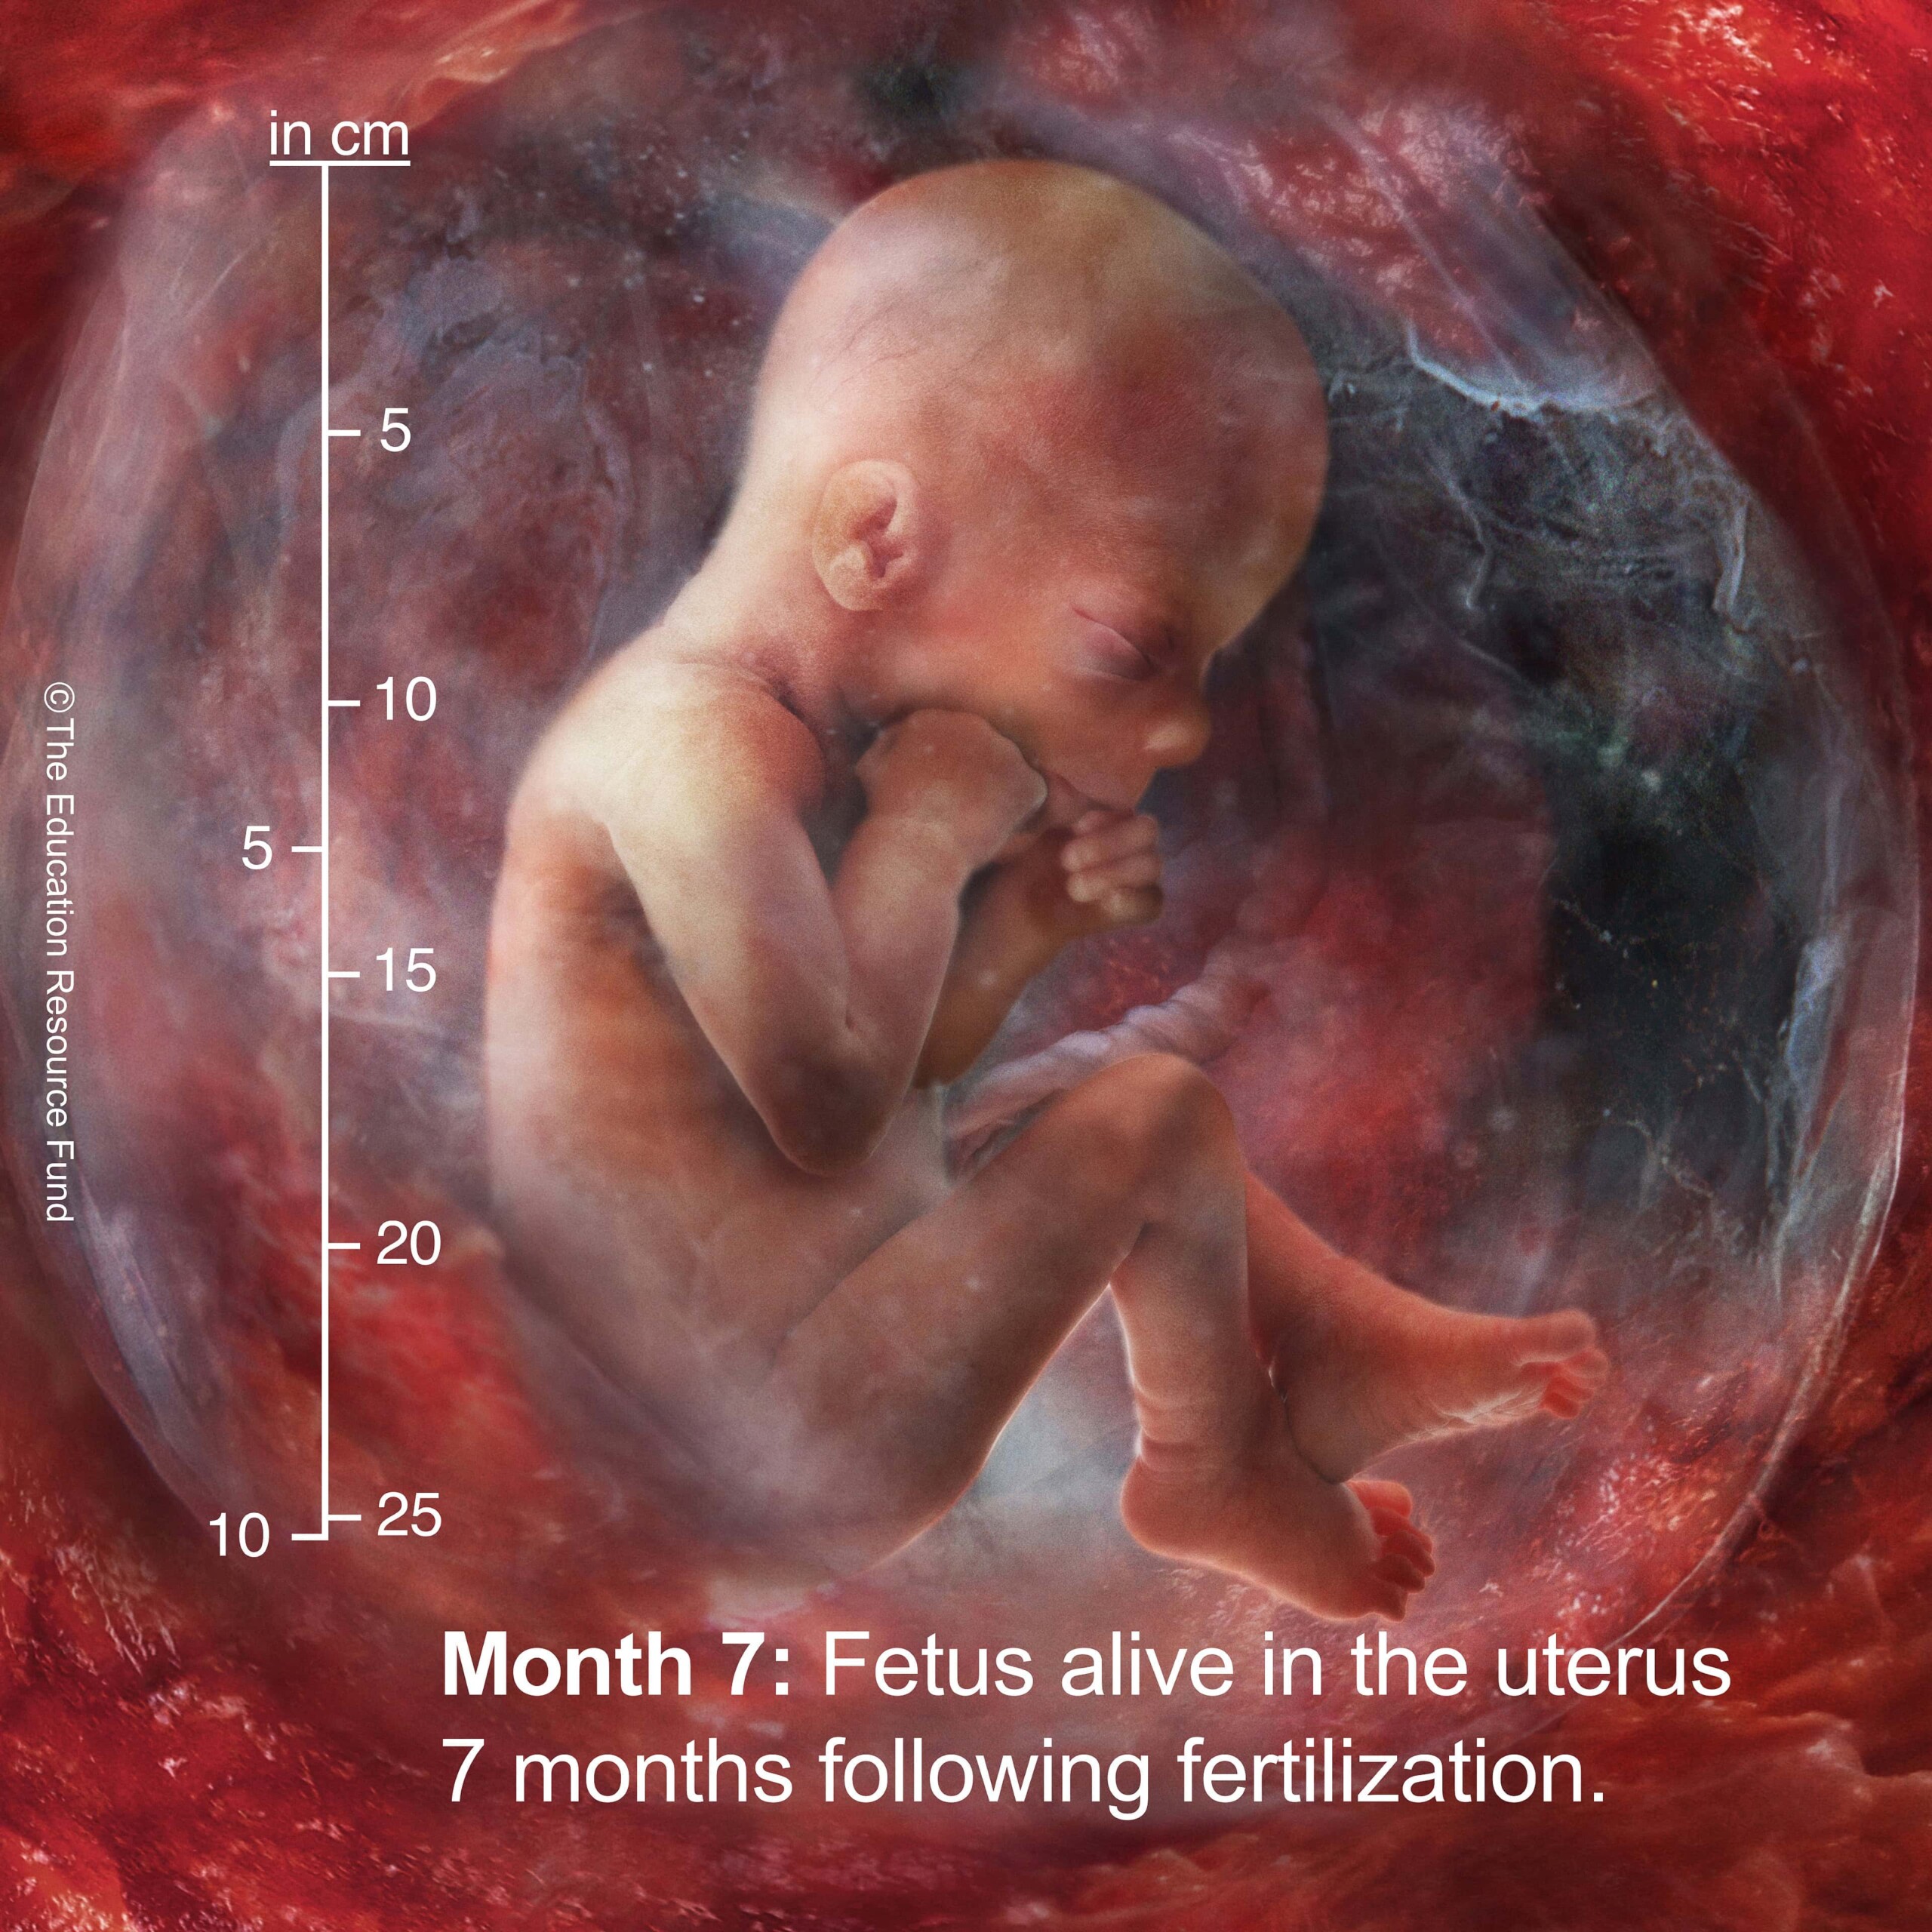 Month 7: Embryo alive in the uterus 7 months following fertilization